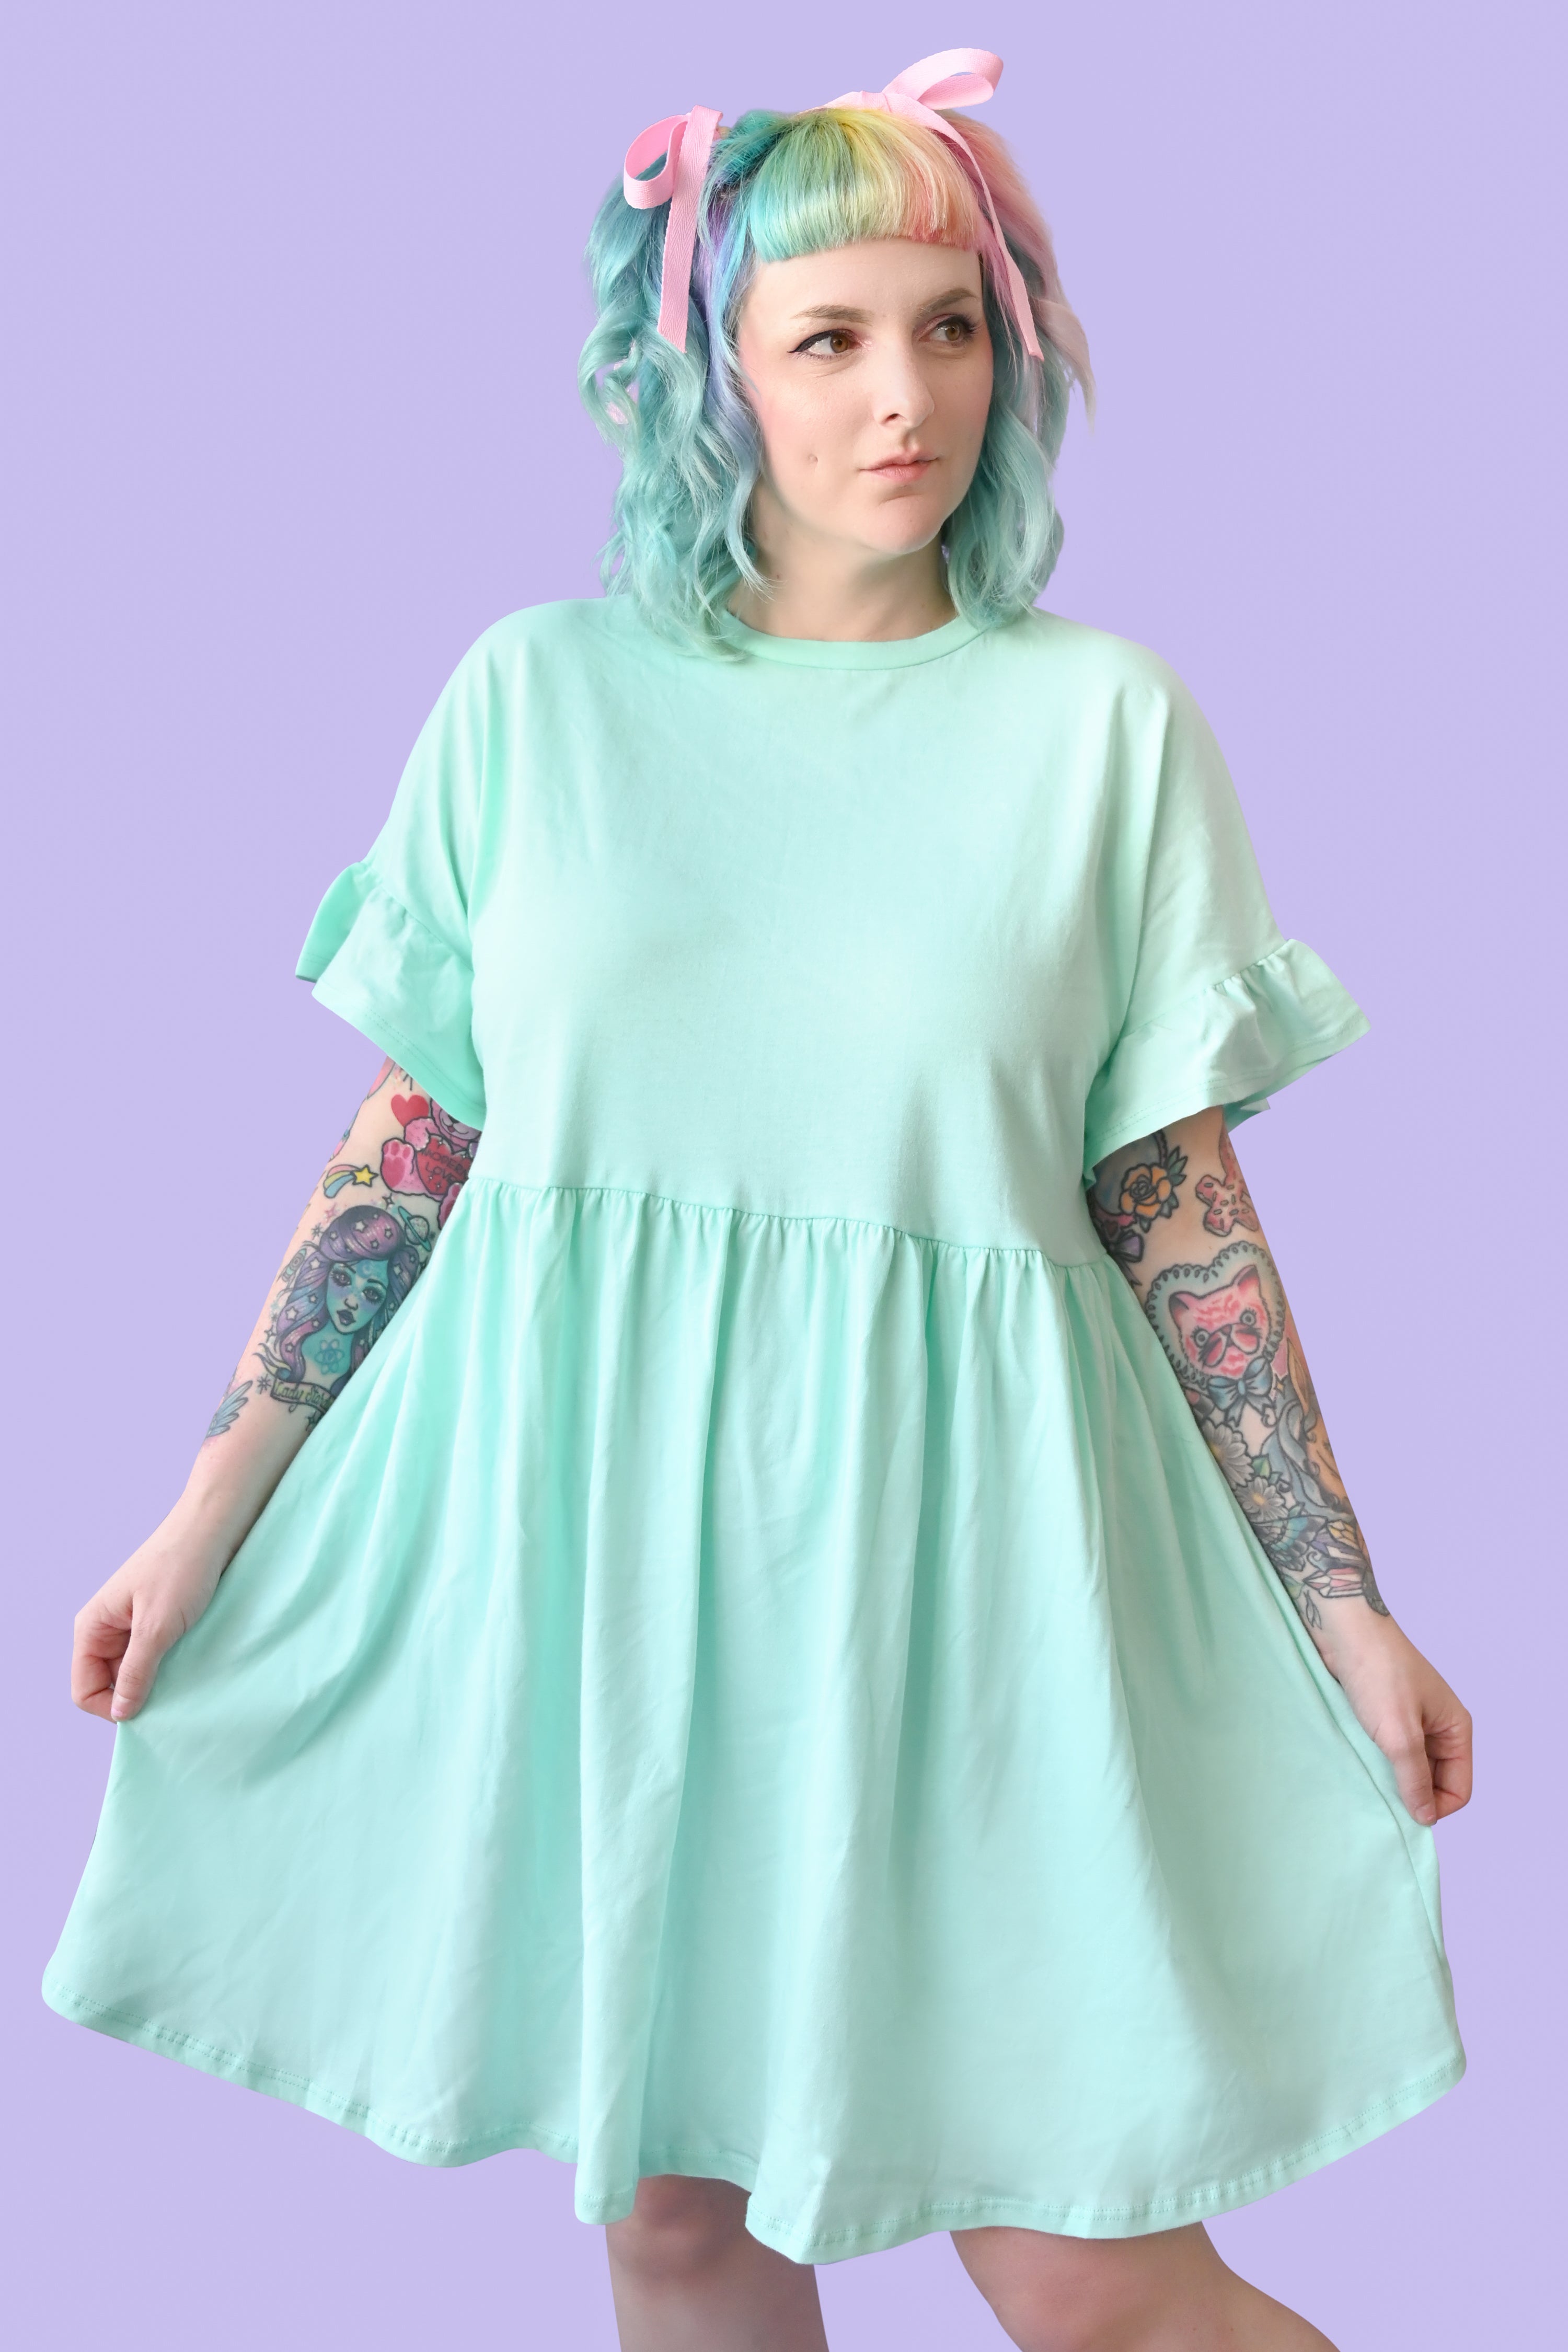 Mint colored loose fitting cotton dress with ruffled sleeves